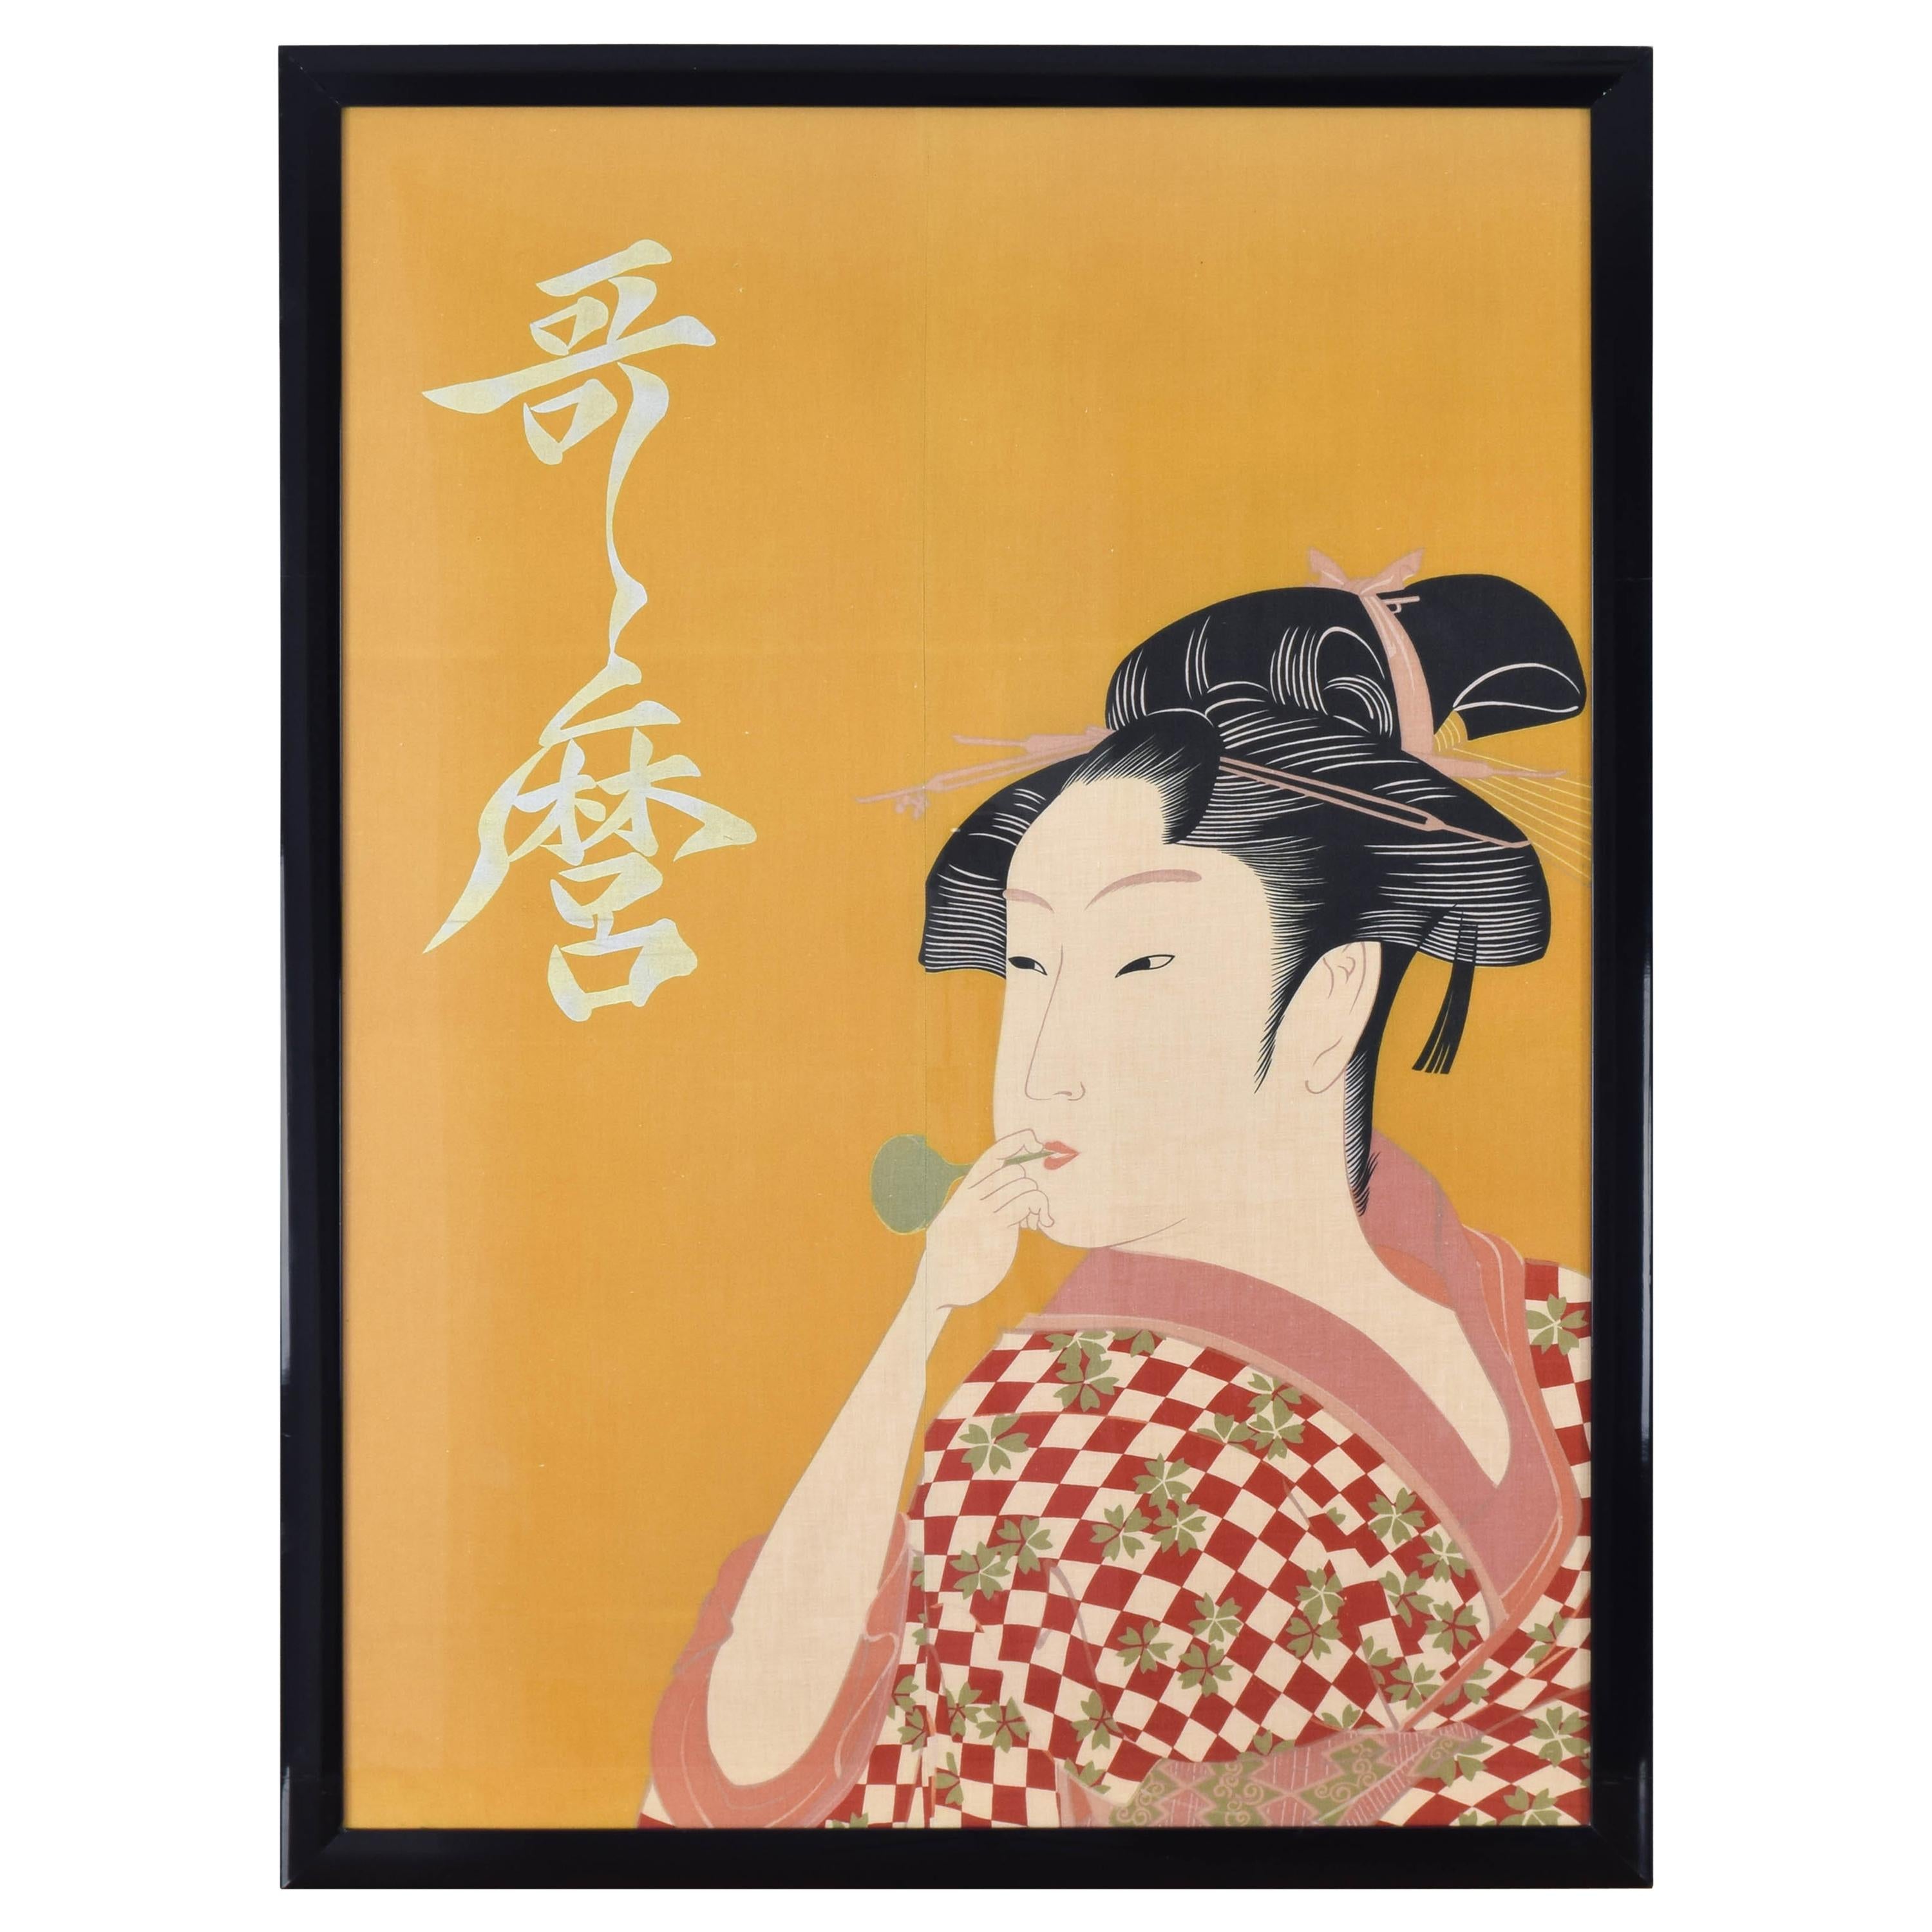 Large Midcentury Canvas Inspired by the Image of Utamaro Woman Playing a Poppin